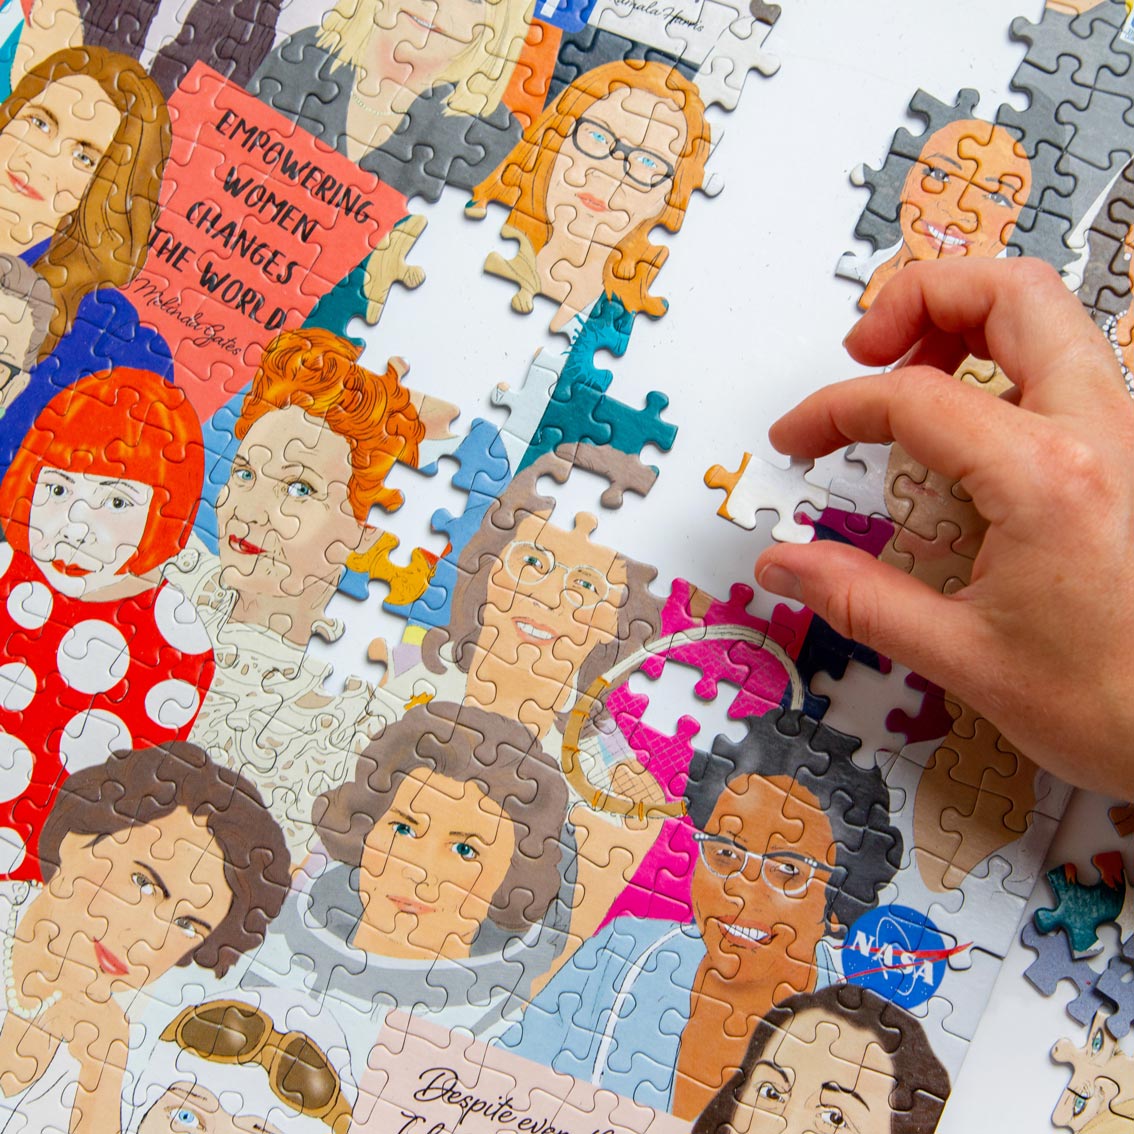 An image of someone with a while complexion completing a jigsaw puzzle featuring Phenomenal Women.